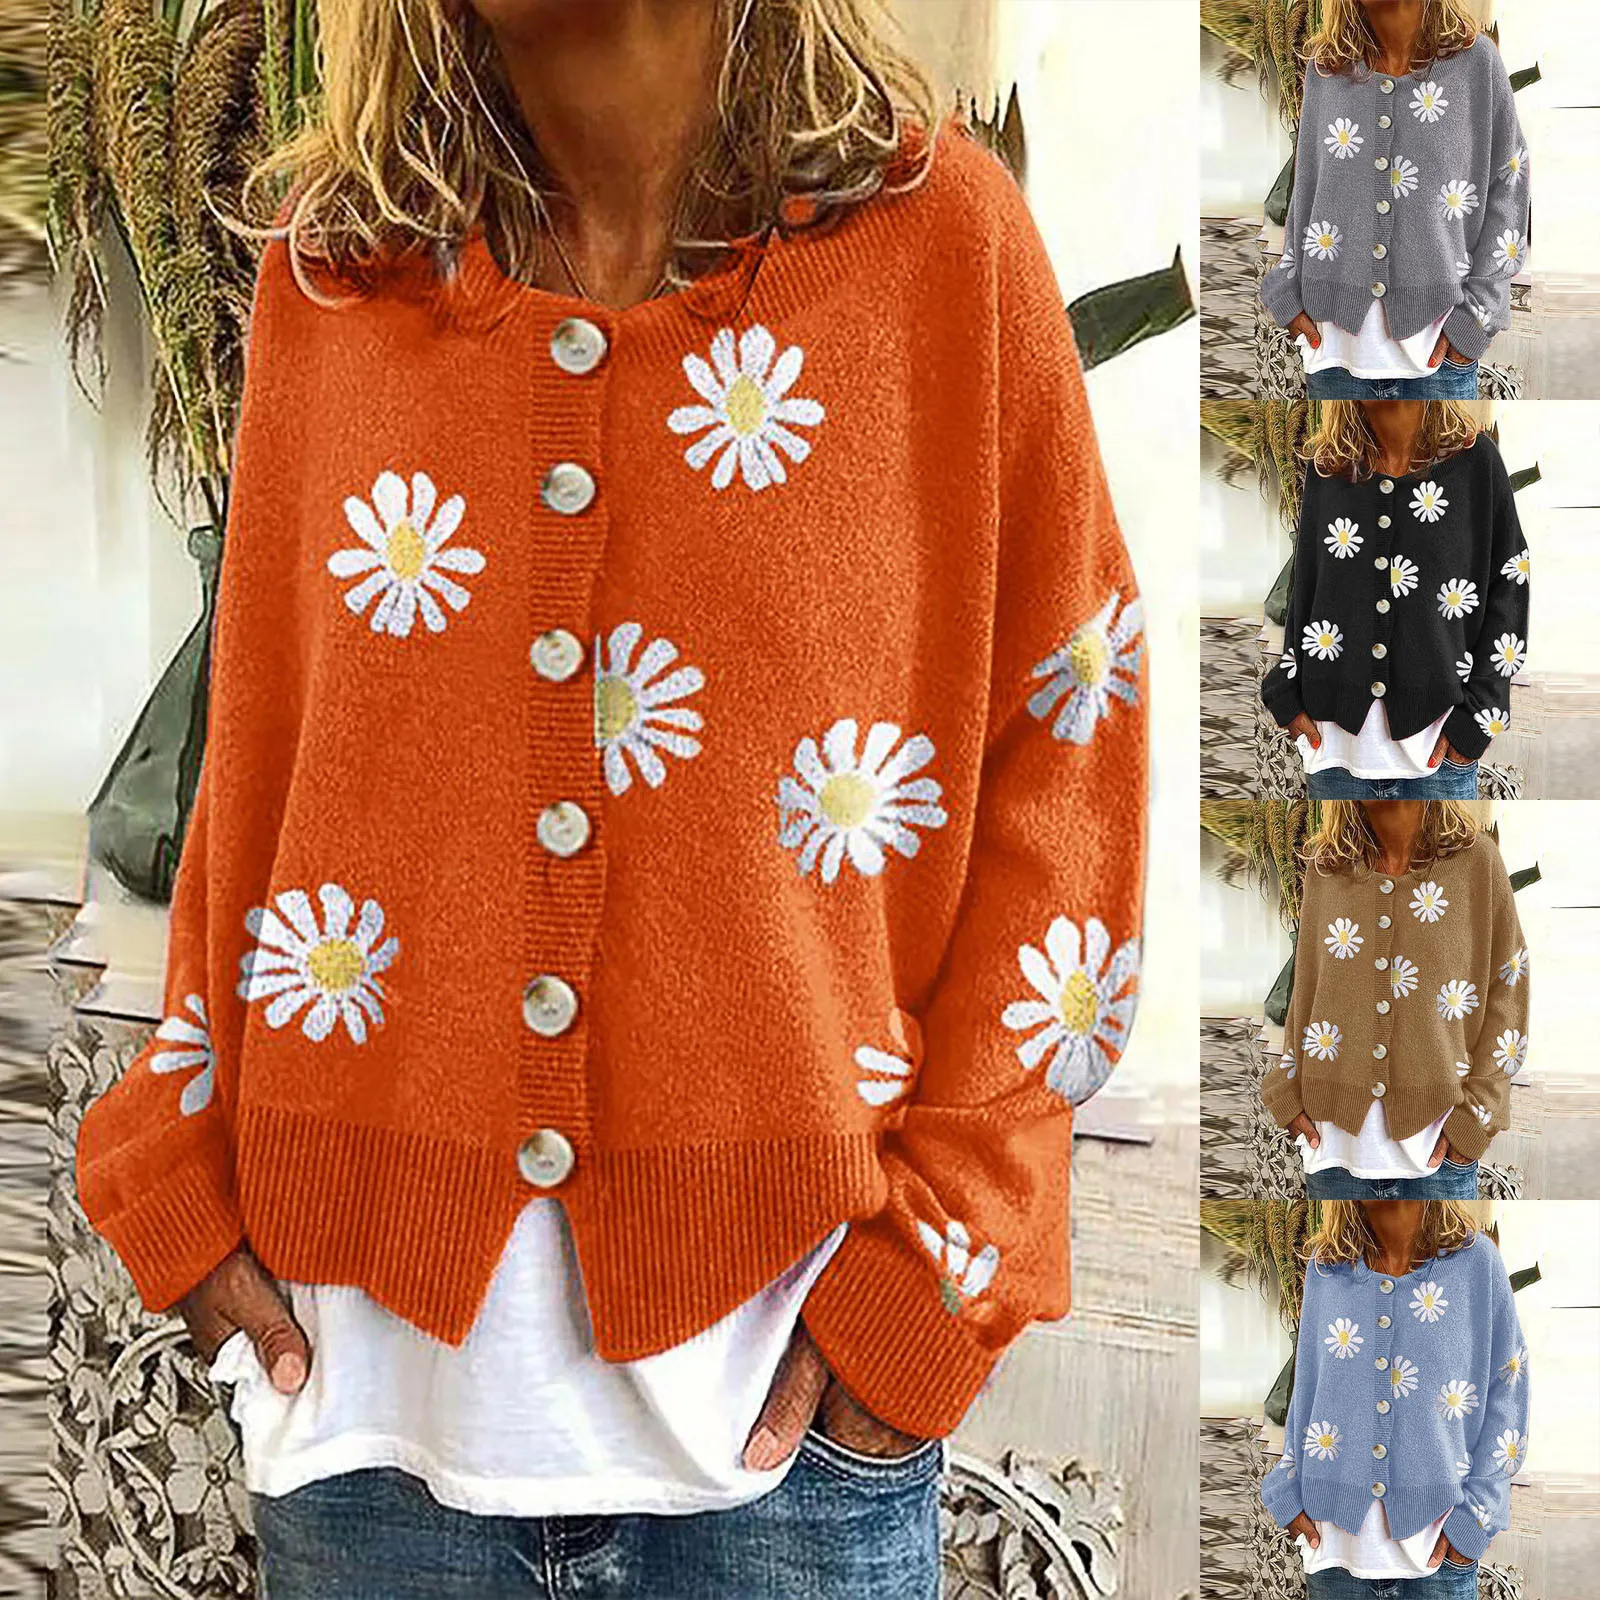 Women Daisy Knitted Sweater Loose Oversize Autumn Winter Jumper Cardigan Thick Casual Warm Cropped Sweater Button Coat свитер